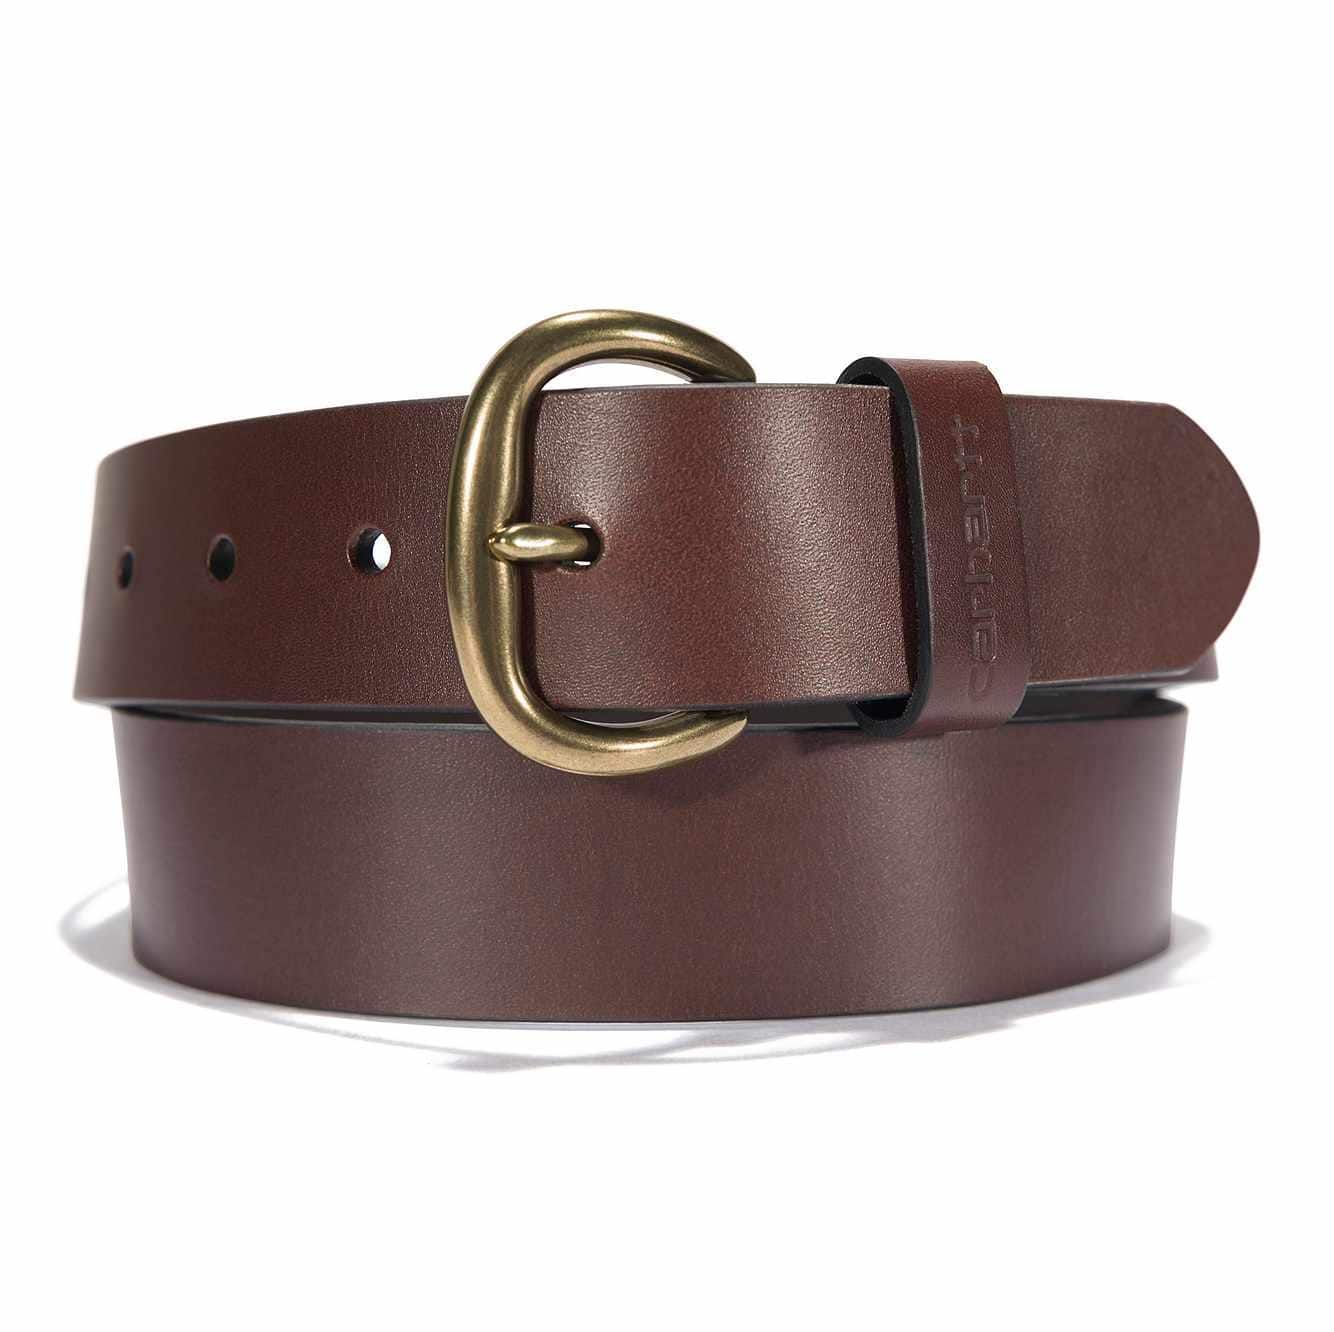 Brown Belts: Adding Warmth to Your Outfit